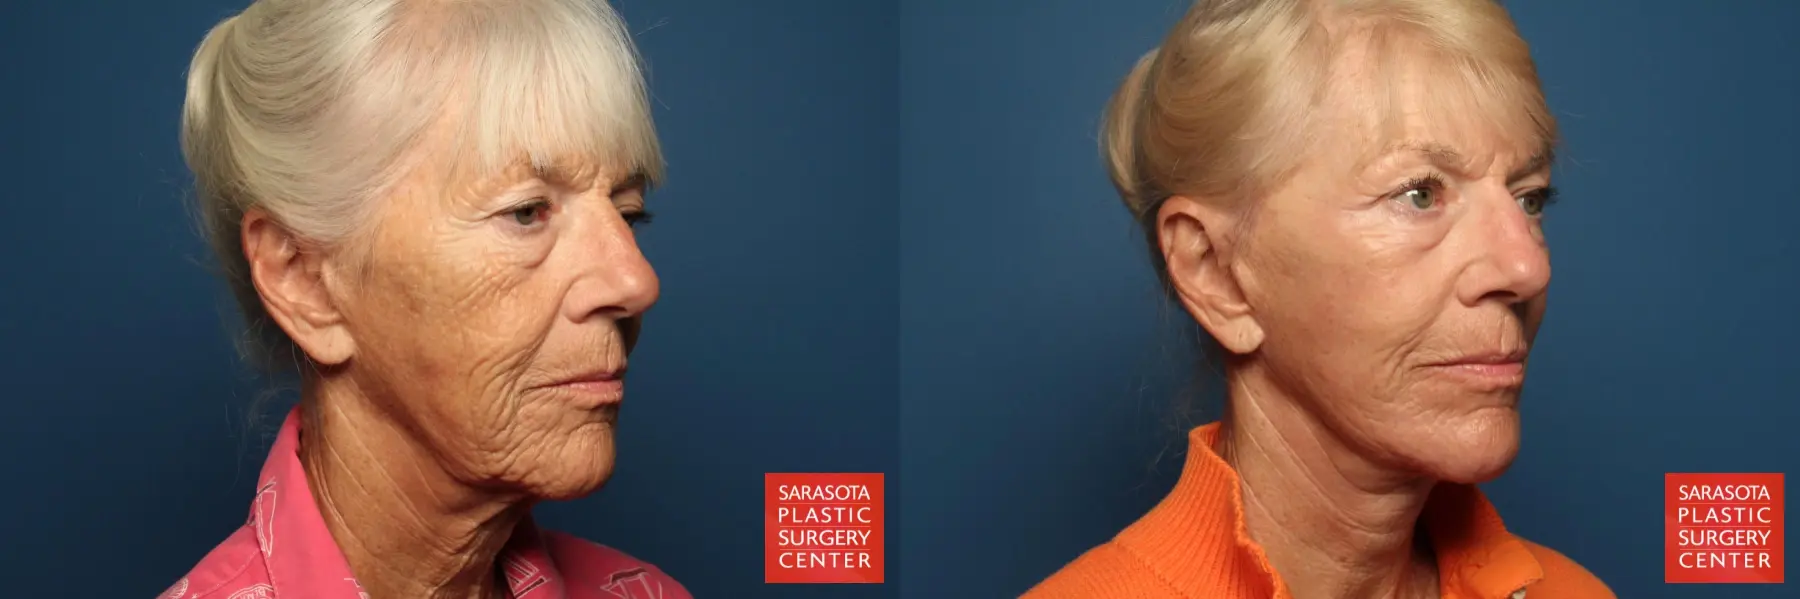 Cheek Lift: Patient 4 - Before and After 2